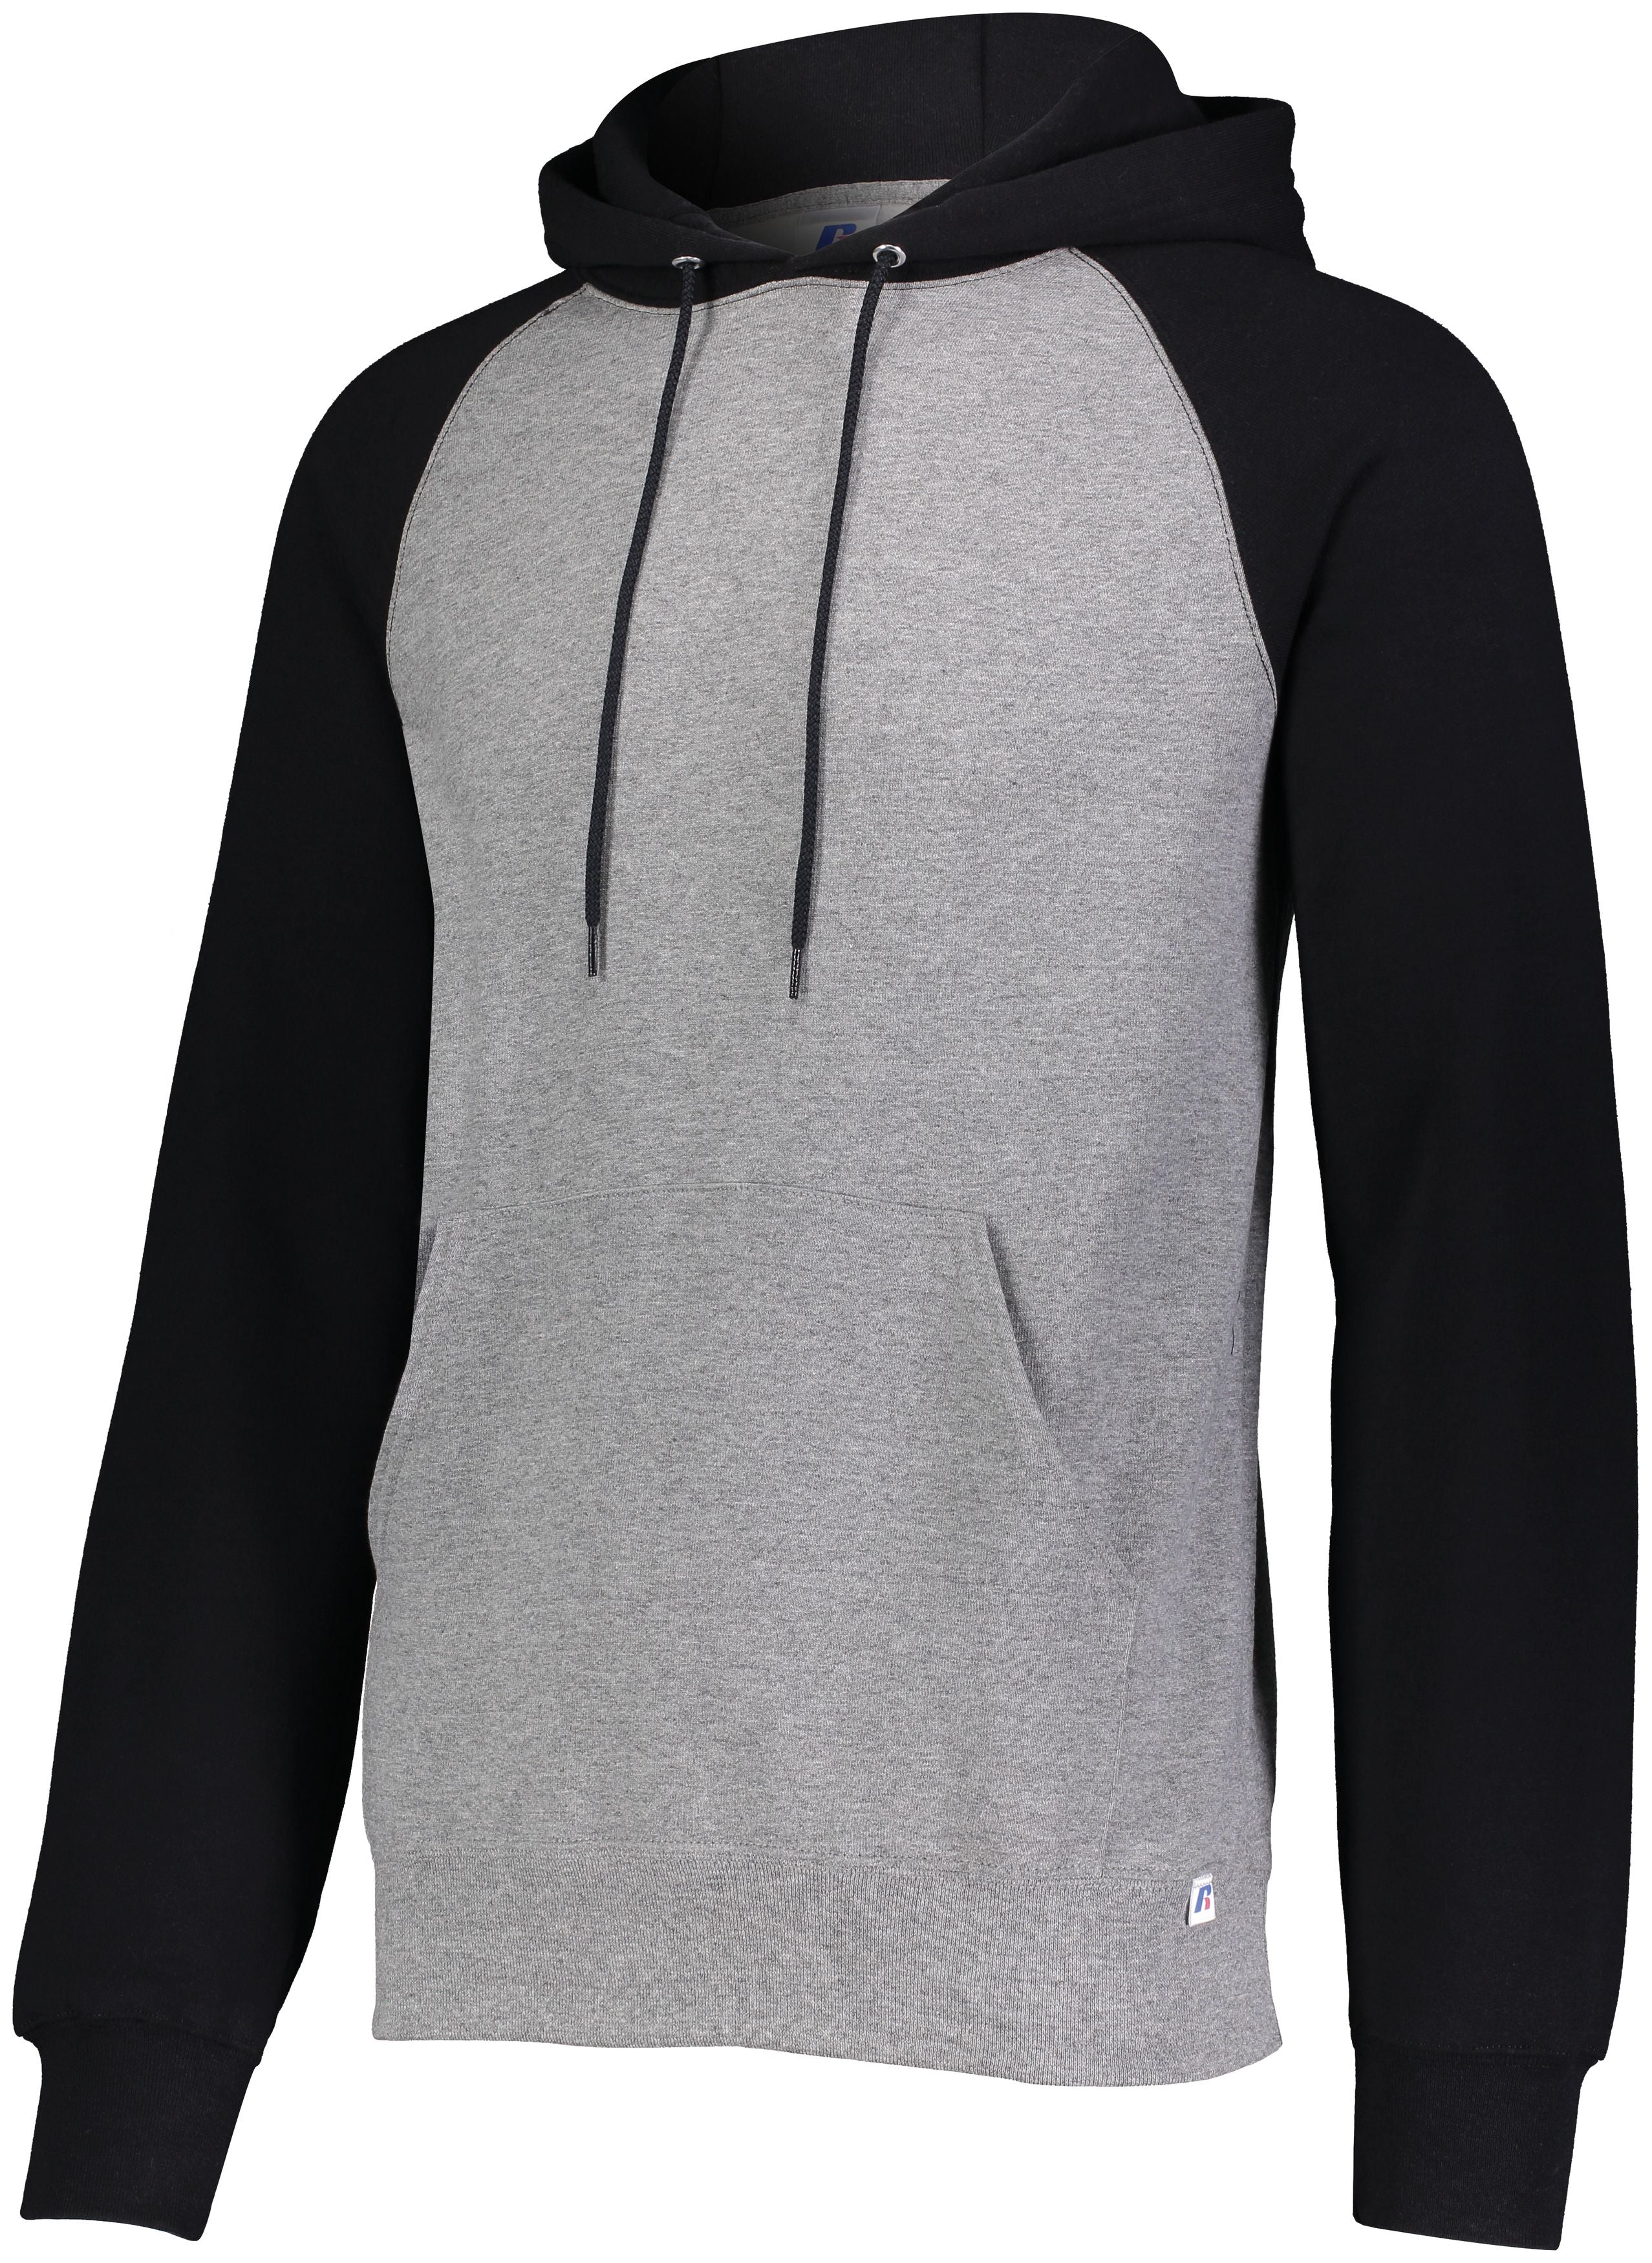 Russell Athletic Dri-Power  Fleece Colorblock Hoodie in Oxford/Black  -Part of the Adult, Russell-Athletic-Products, Shirts product lines at KanaleyCreations.com